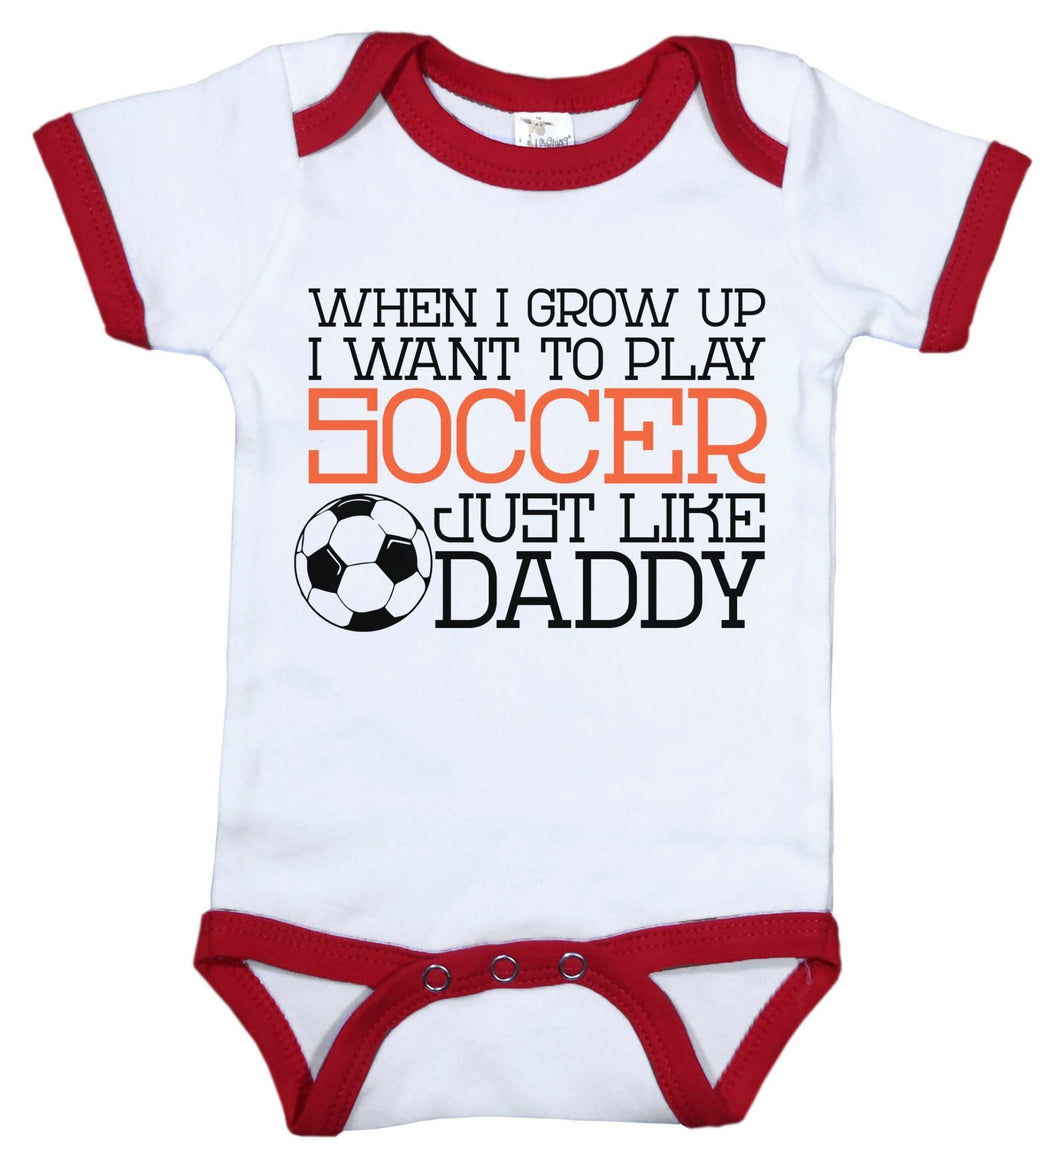 When I Grow Up I Want To Play Soccer Just Like Daddy / Soccer Ringer Onesie - Baffle